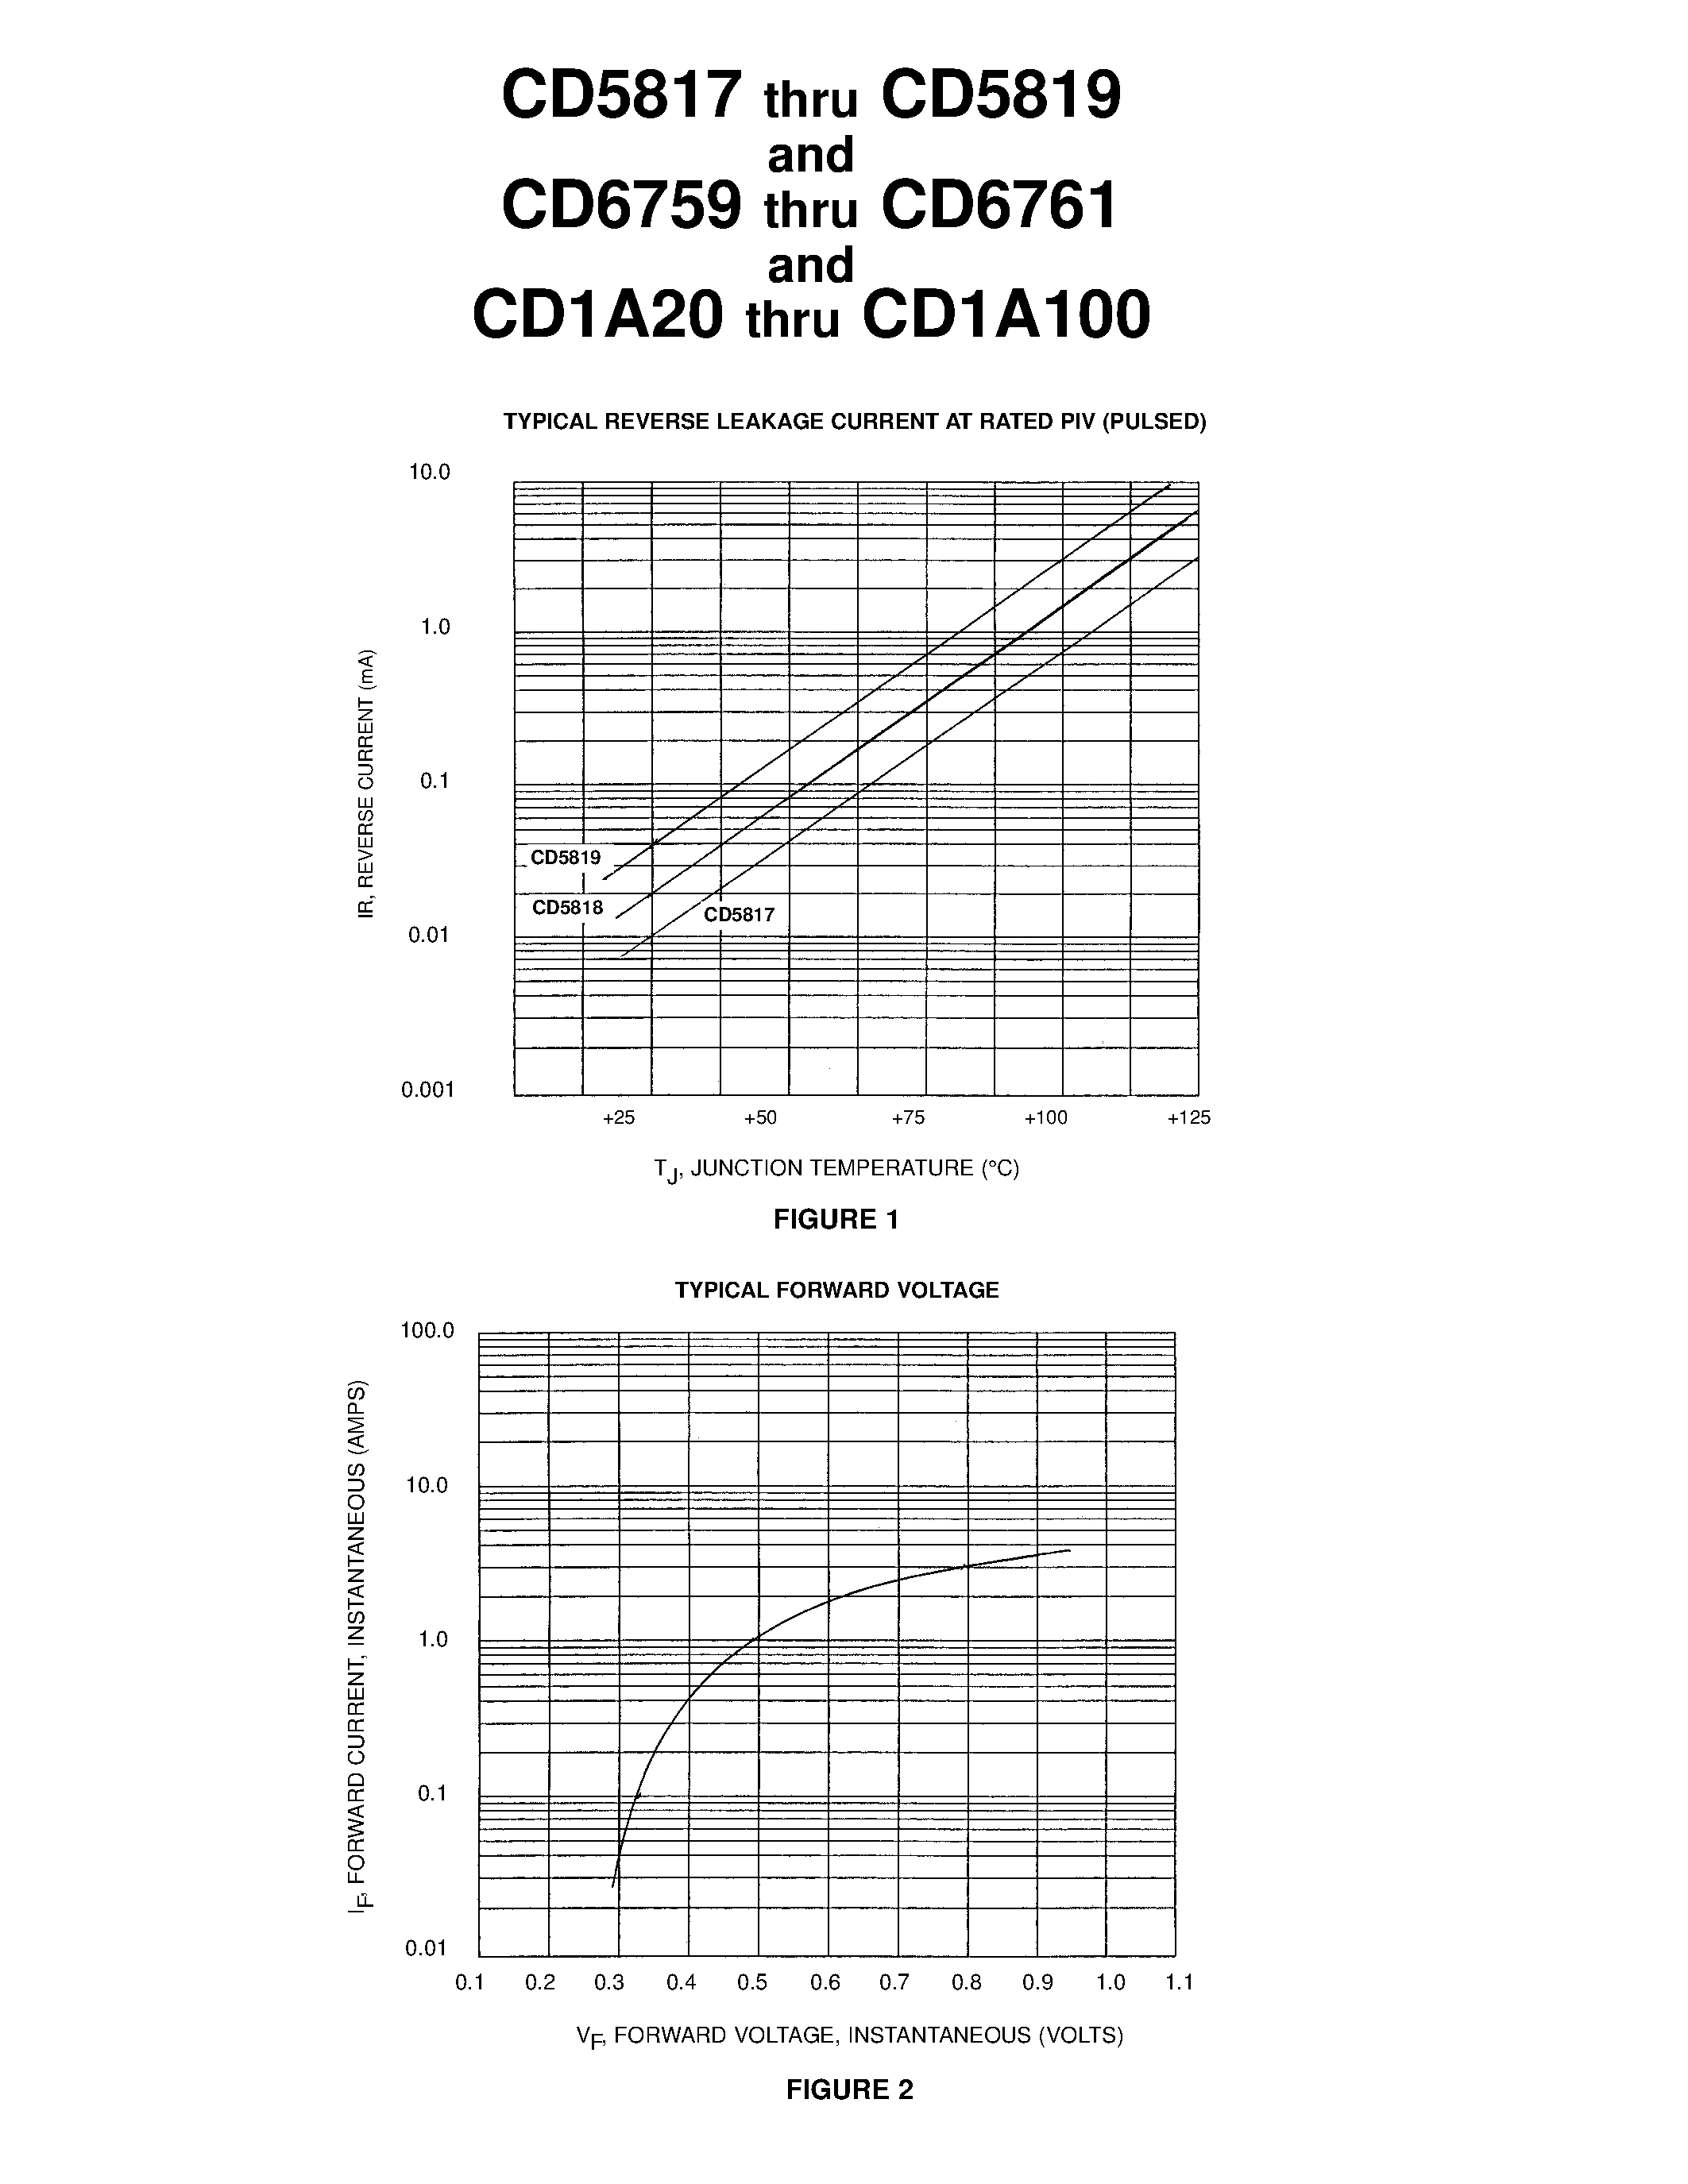 Datasheet CD1A60 - 1 AMP SCHOTTKY BARRIER RECTIFIER CHIPS page 2